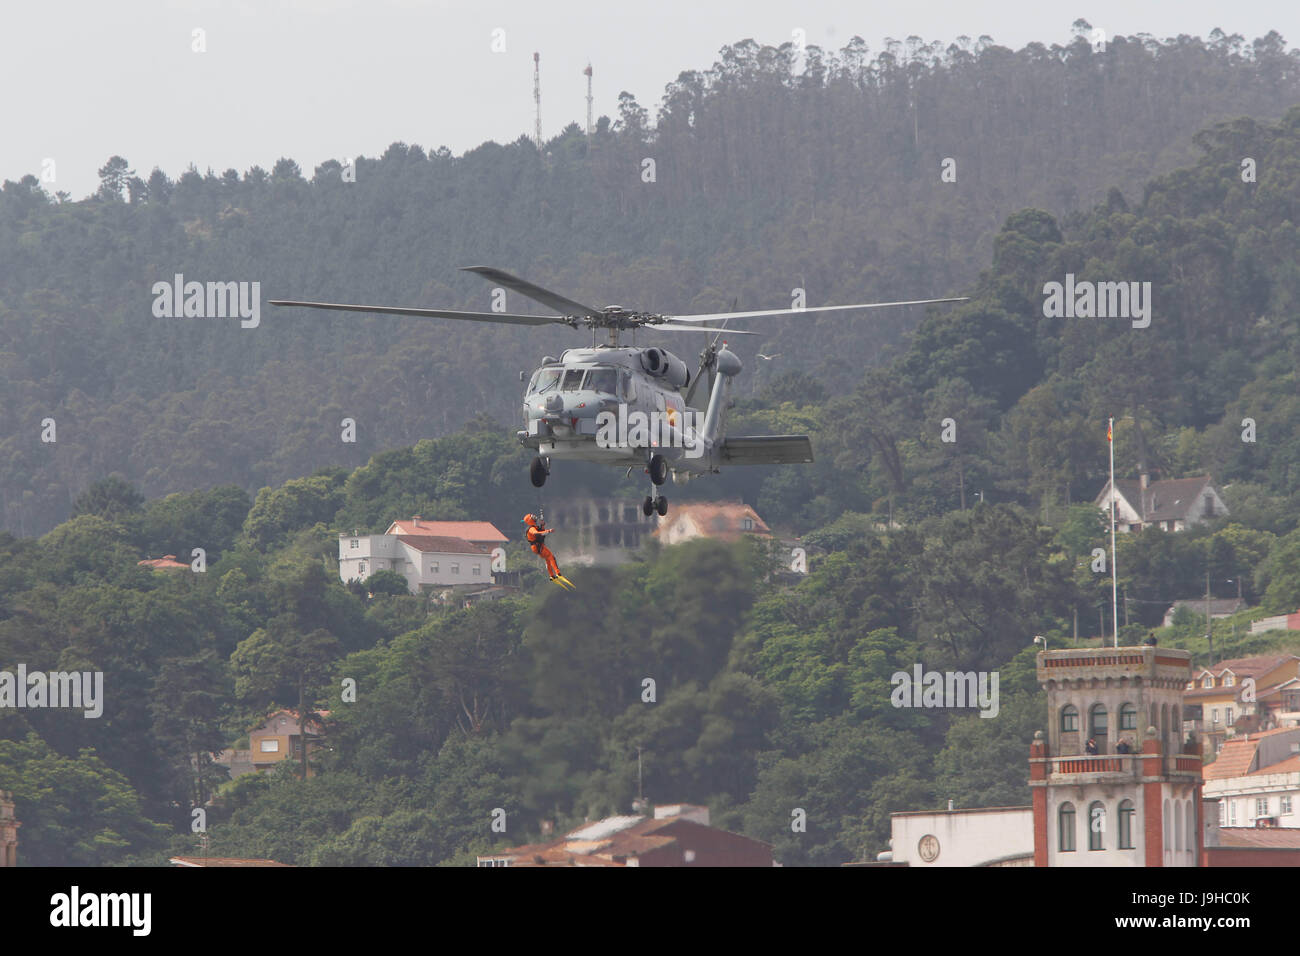 SH-60 Seahawk of the Spanish Navy during the ceremony commemorating the 300th anniversary of the creation of the Marine Guard company, in Mar’n, Pontevedra, Spain, Friday, June 2, 2017.  Today is the third anniversary of the abdication of Juan Carlos I as King of Spain. Stock Photo